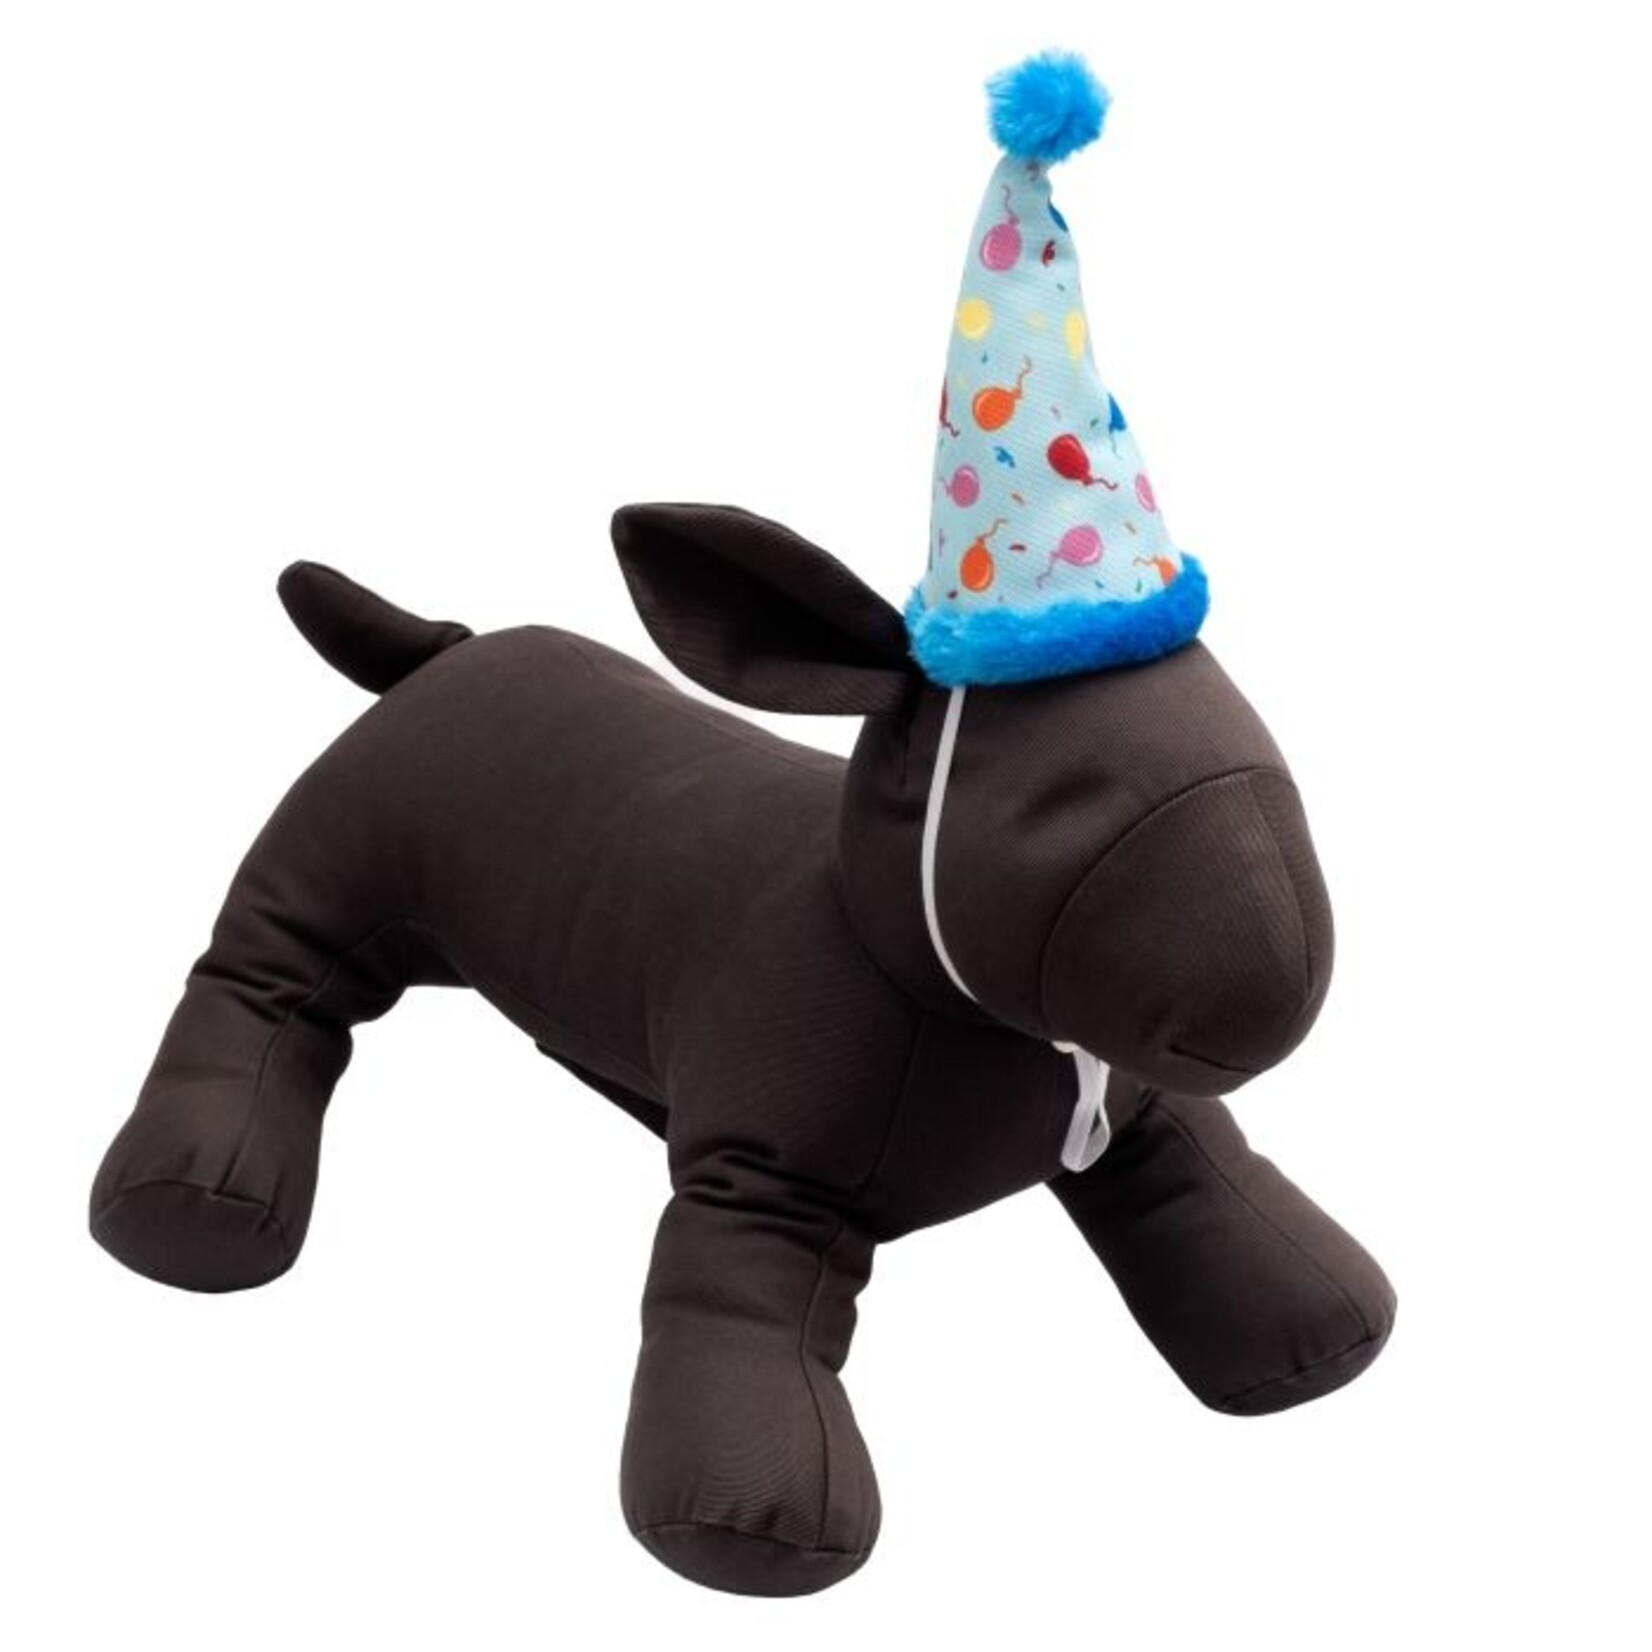 The Worthy Dog The Worthy Dog Blue Party Hat Small